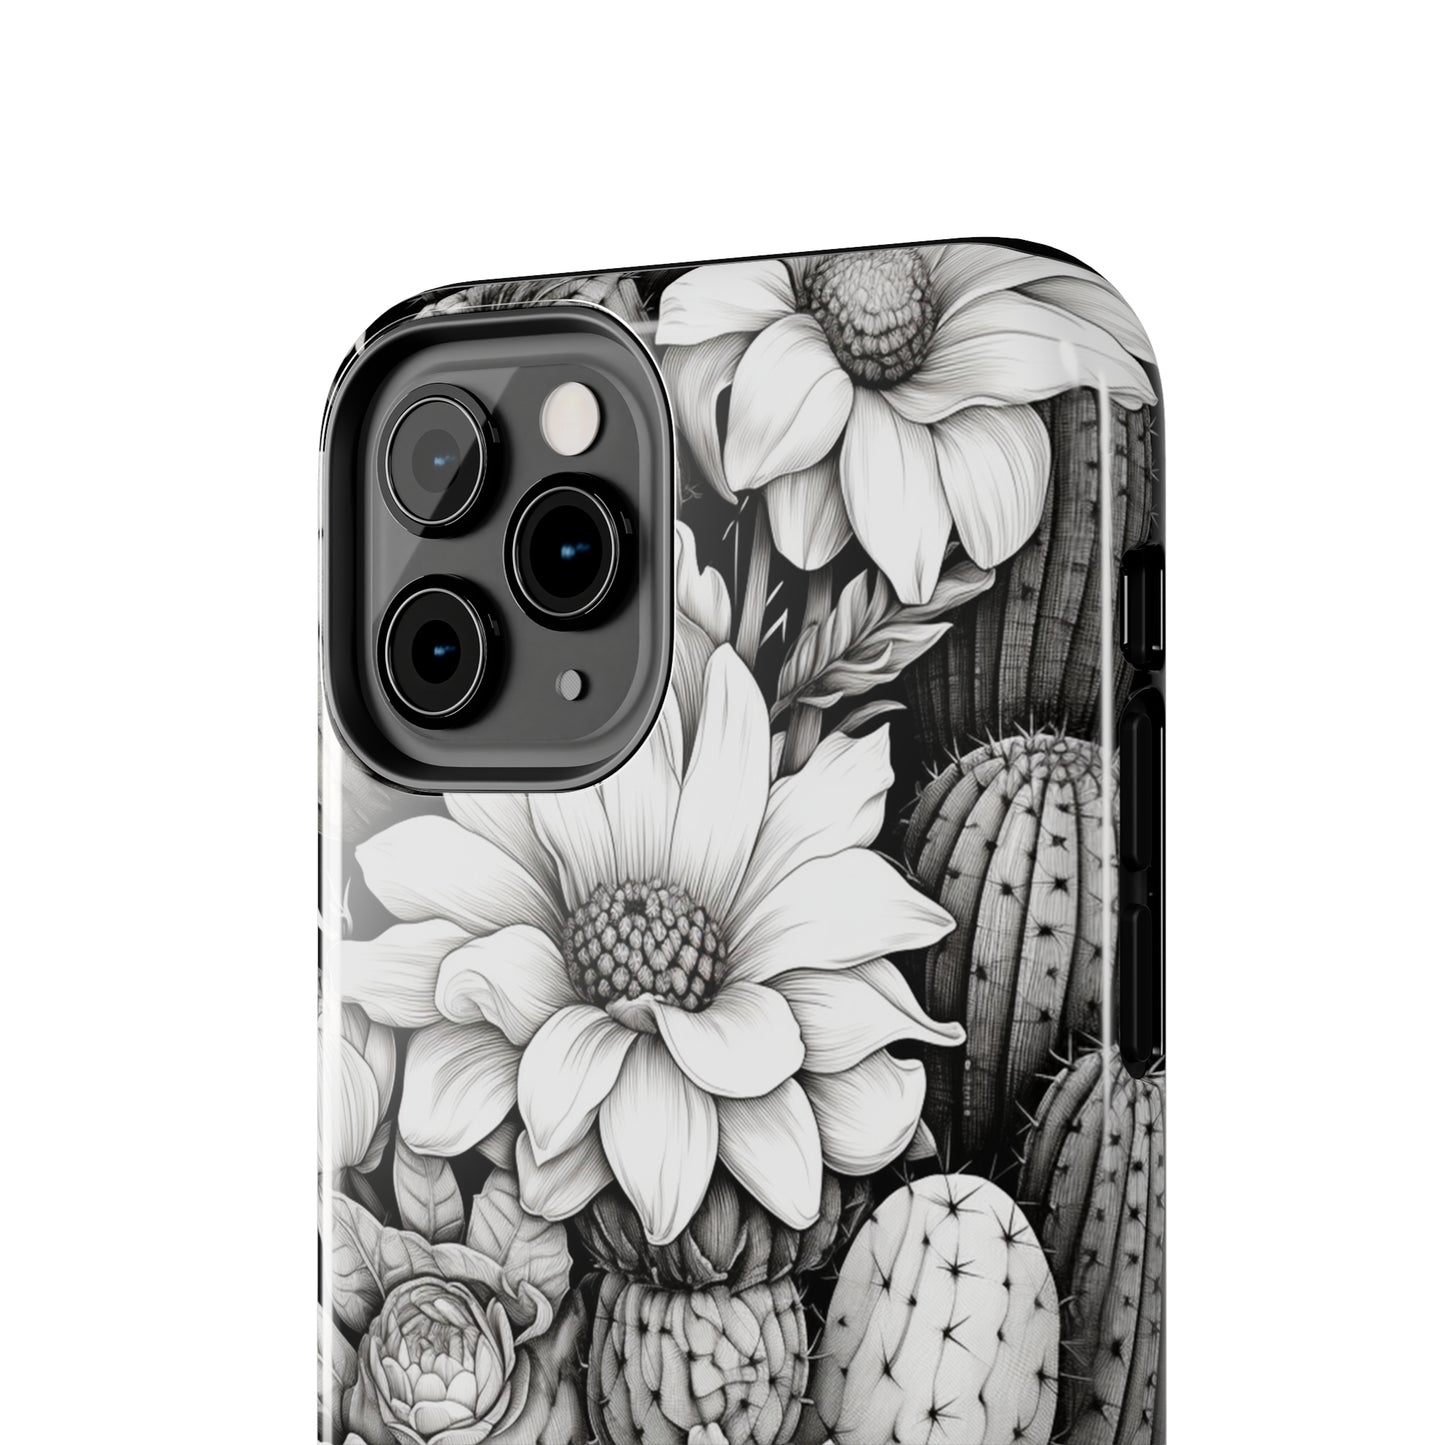 Desert Blooms: Floral Cactus Fusion | Nature's Resilience iPhone Case